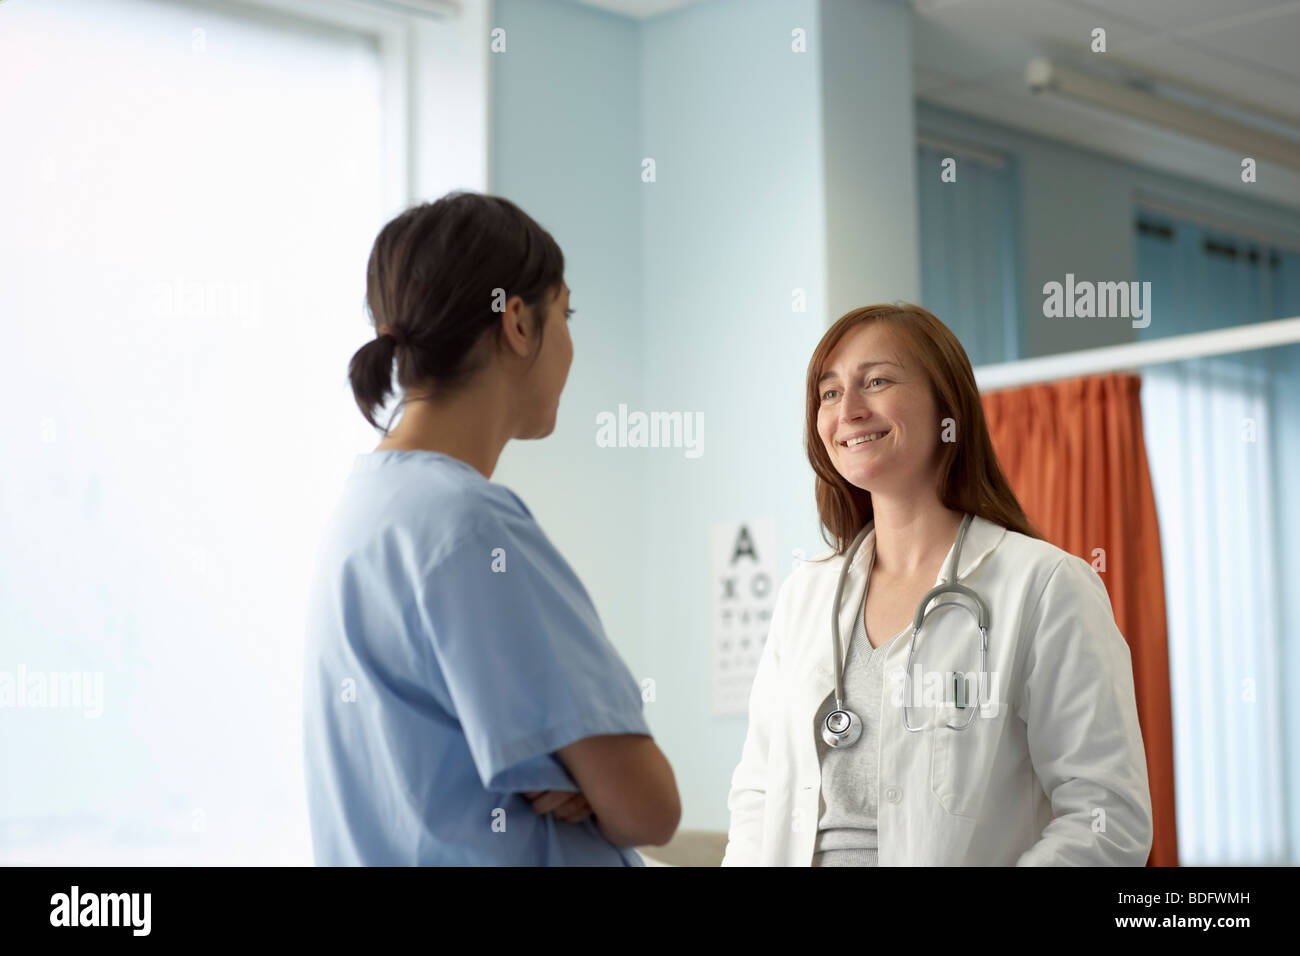 Nurse and doctor in discussion Stock Photo